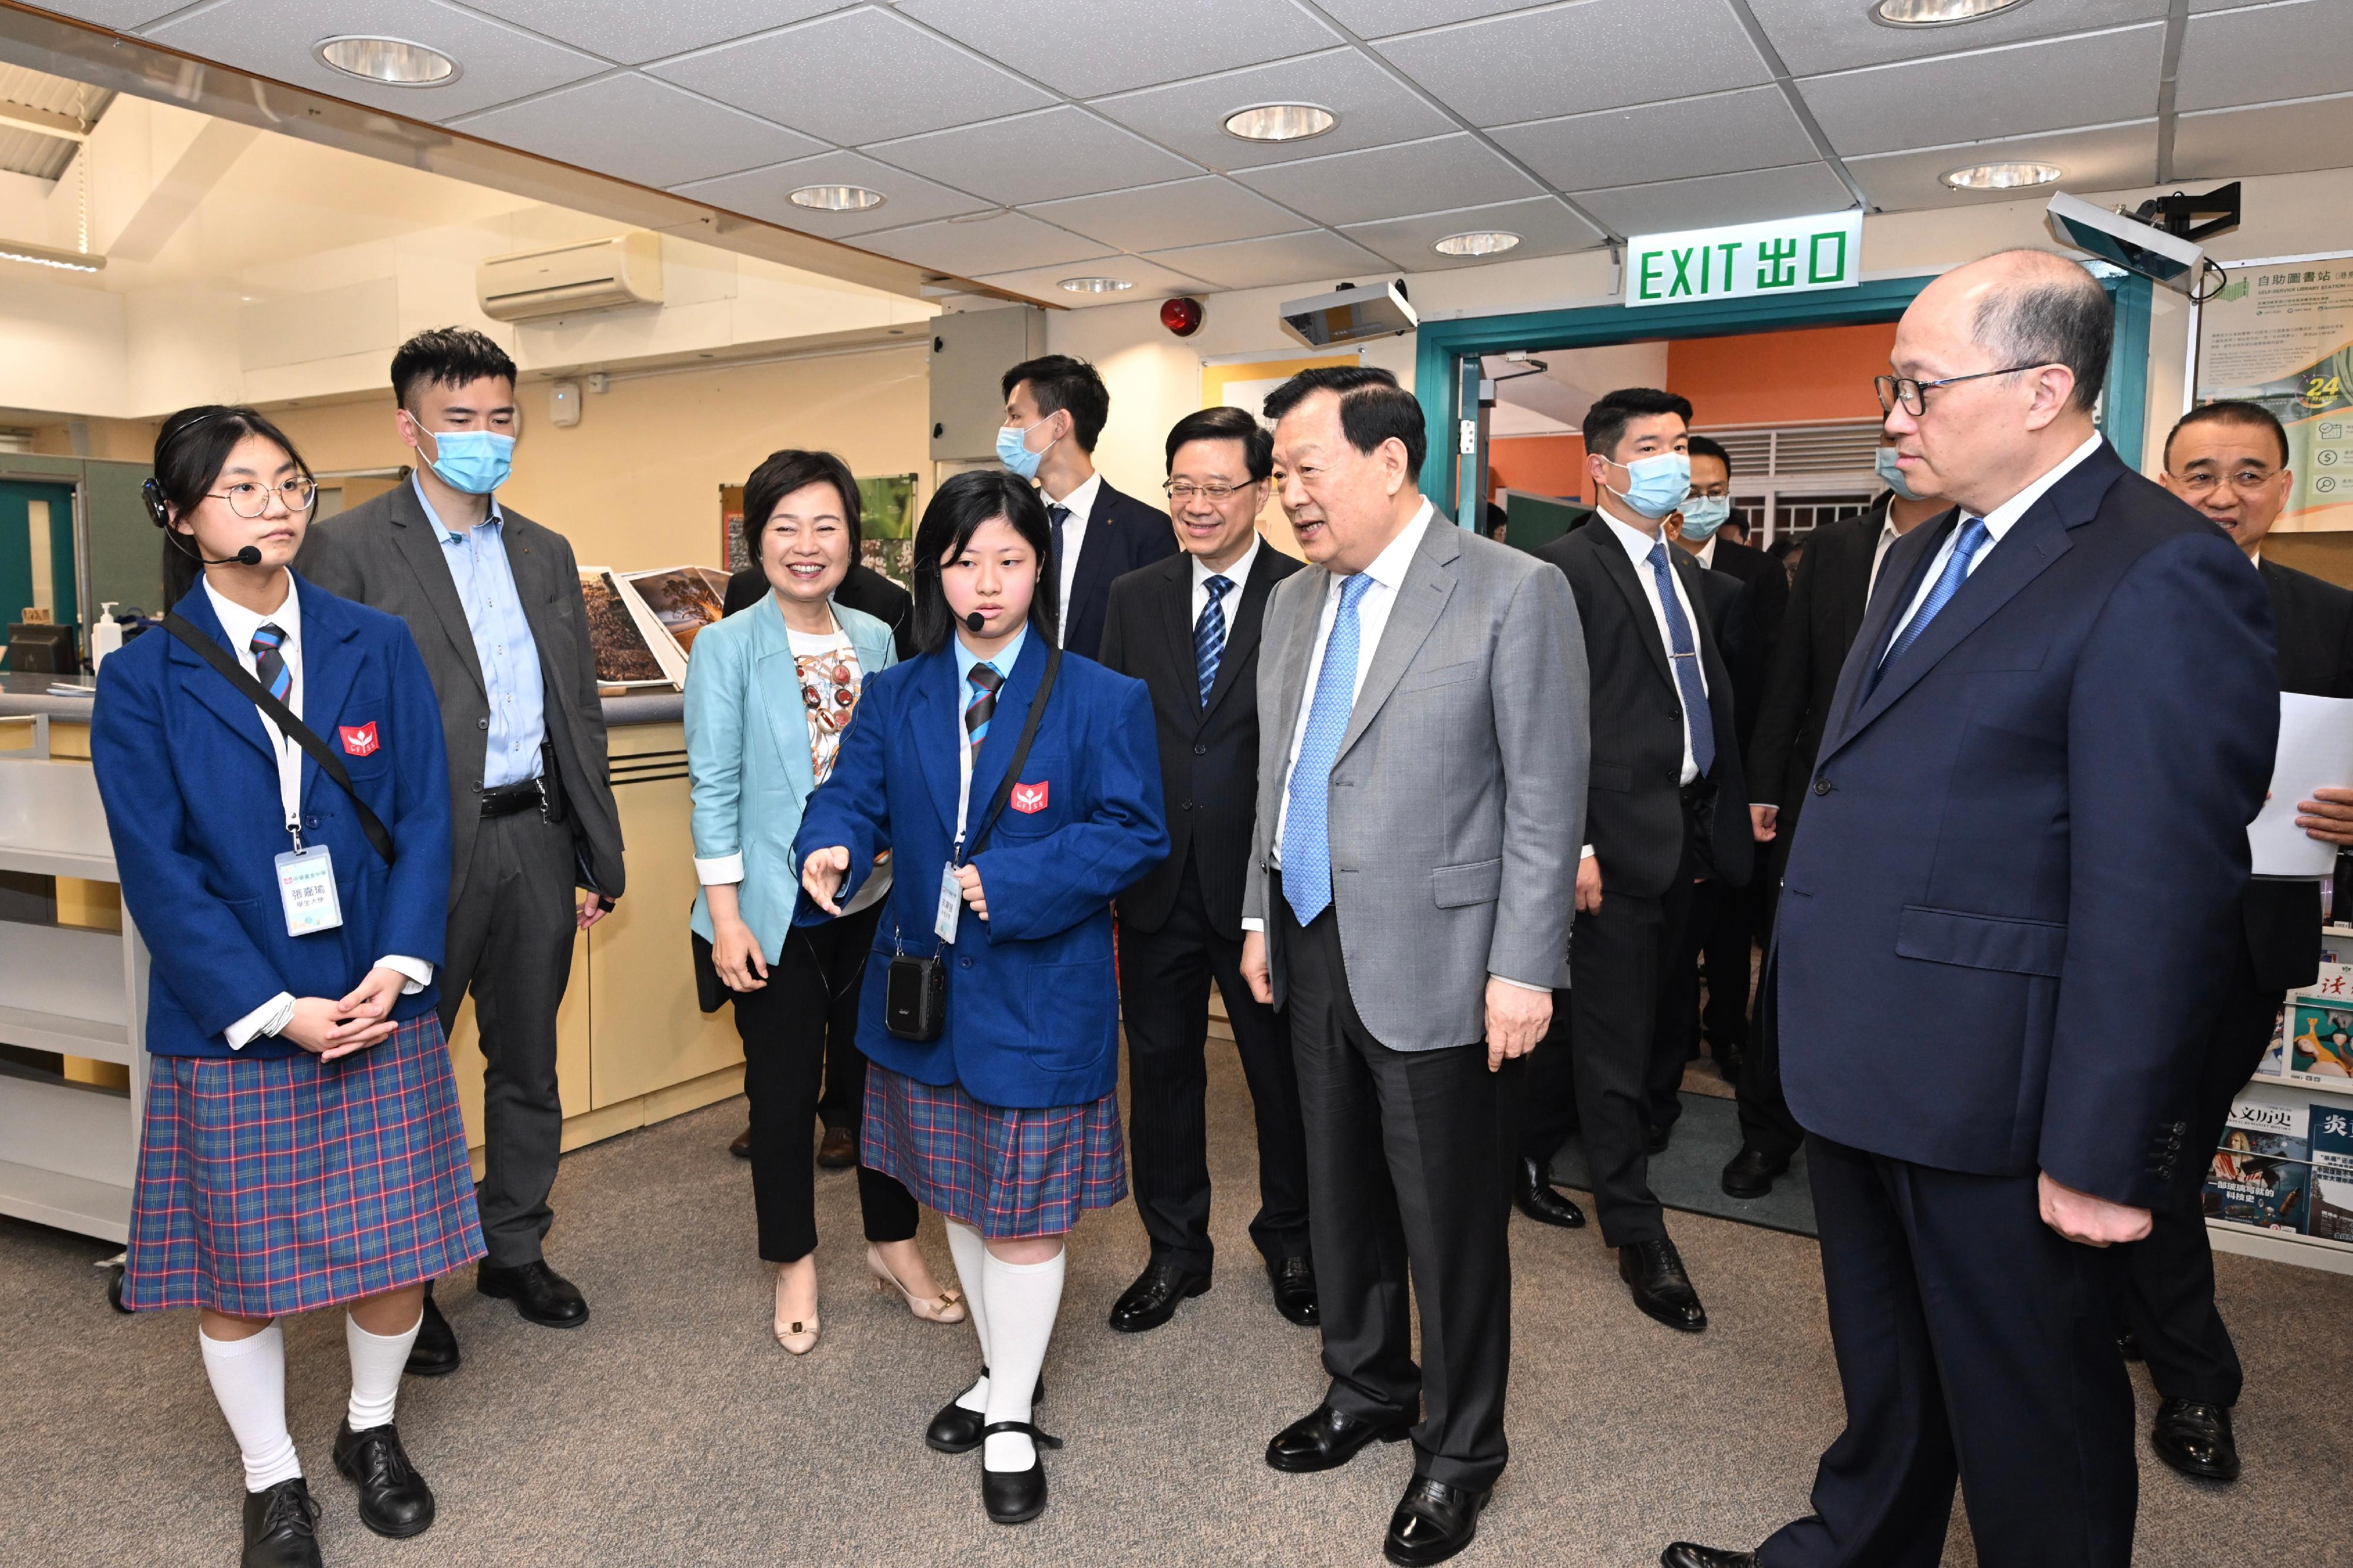 The Vice Chairman of the 13th Chinese People's Political Consultative Conference and Director of the Hong Kong and Macao Affairs Office of the State Council, Mr Xia Baolong (second right), accompanied by the Chief Executive, Mr John Lee (third right); and the Secretary for Education, Dr Choi Yuk-lin (third left), visited the Chinese Foundation Secondary School and listened to students' sharing on their learning experience today (April 18).